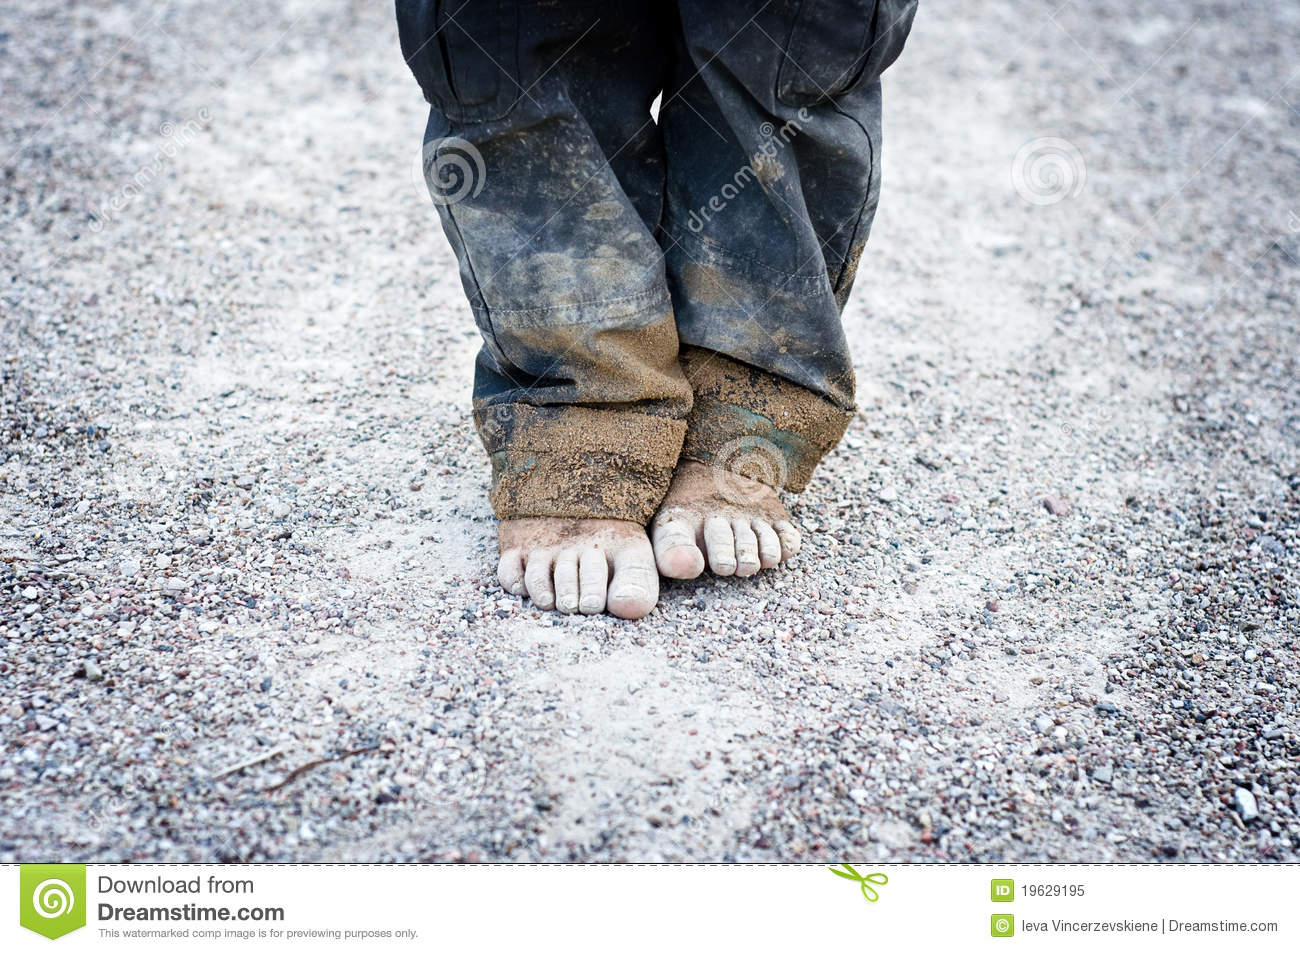 Child S Dirty Feet Royalty Free Stock Photo   Image  19629195